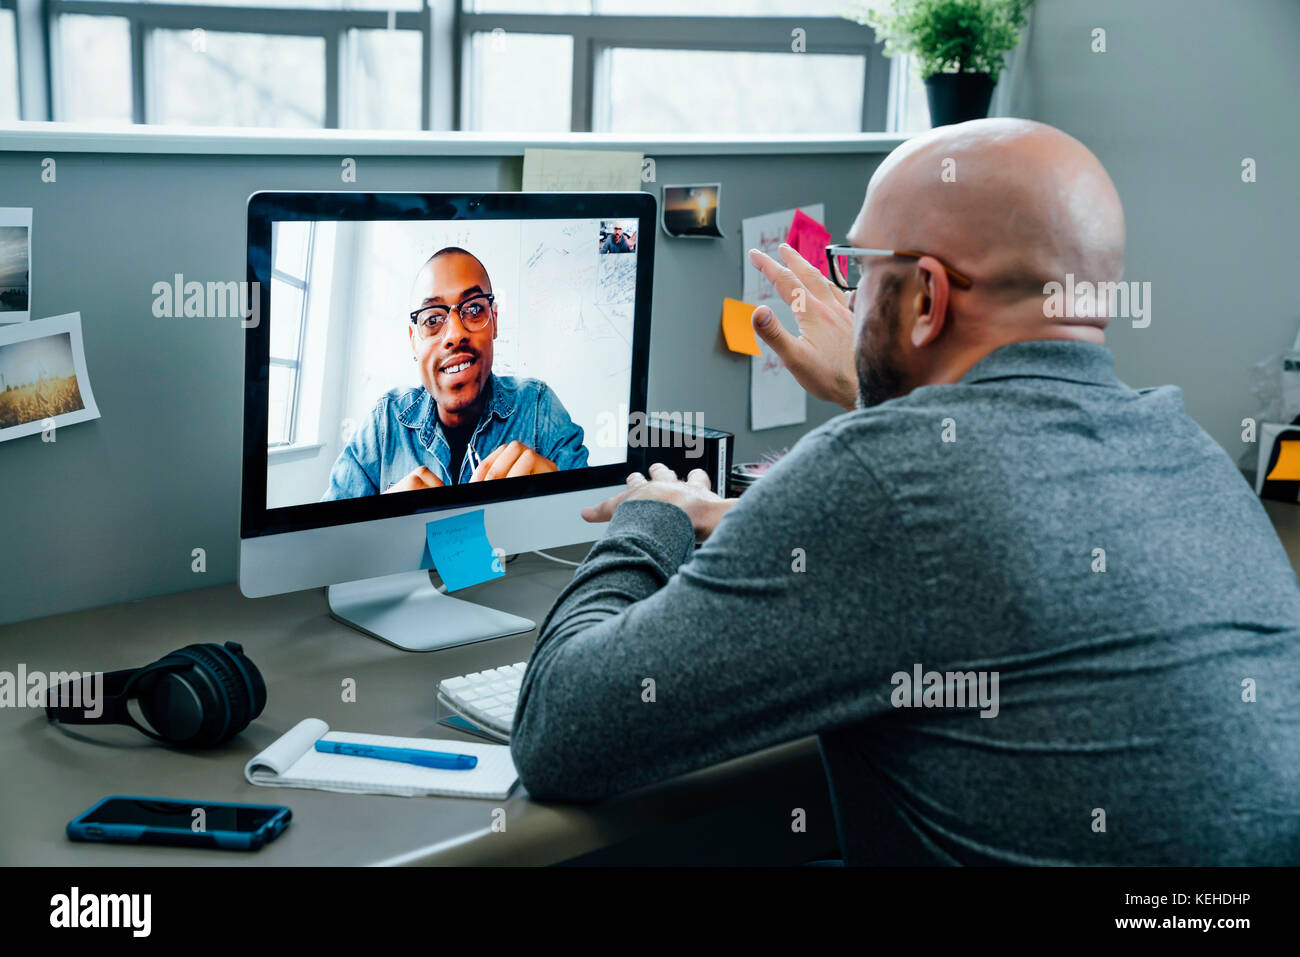 Businessmen on video conference Stock Photo